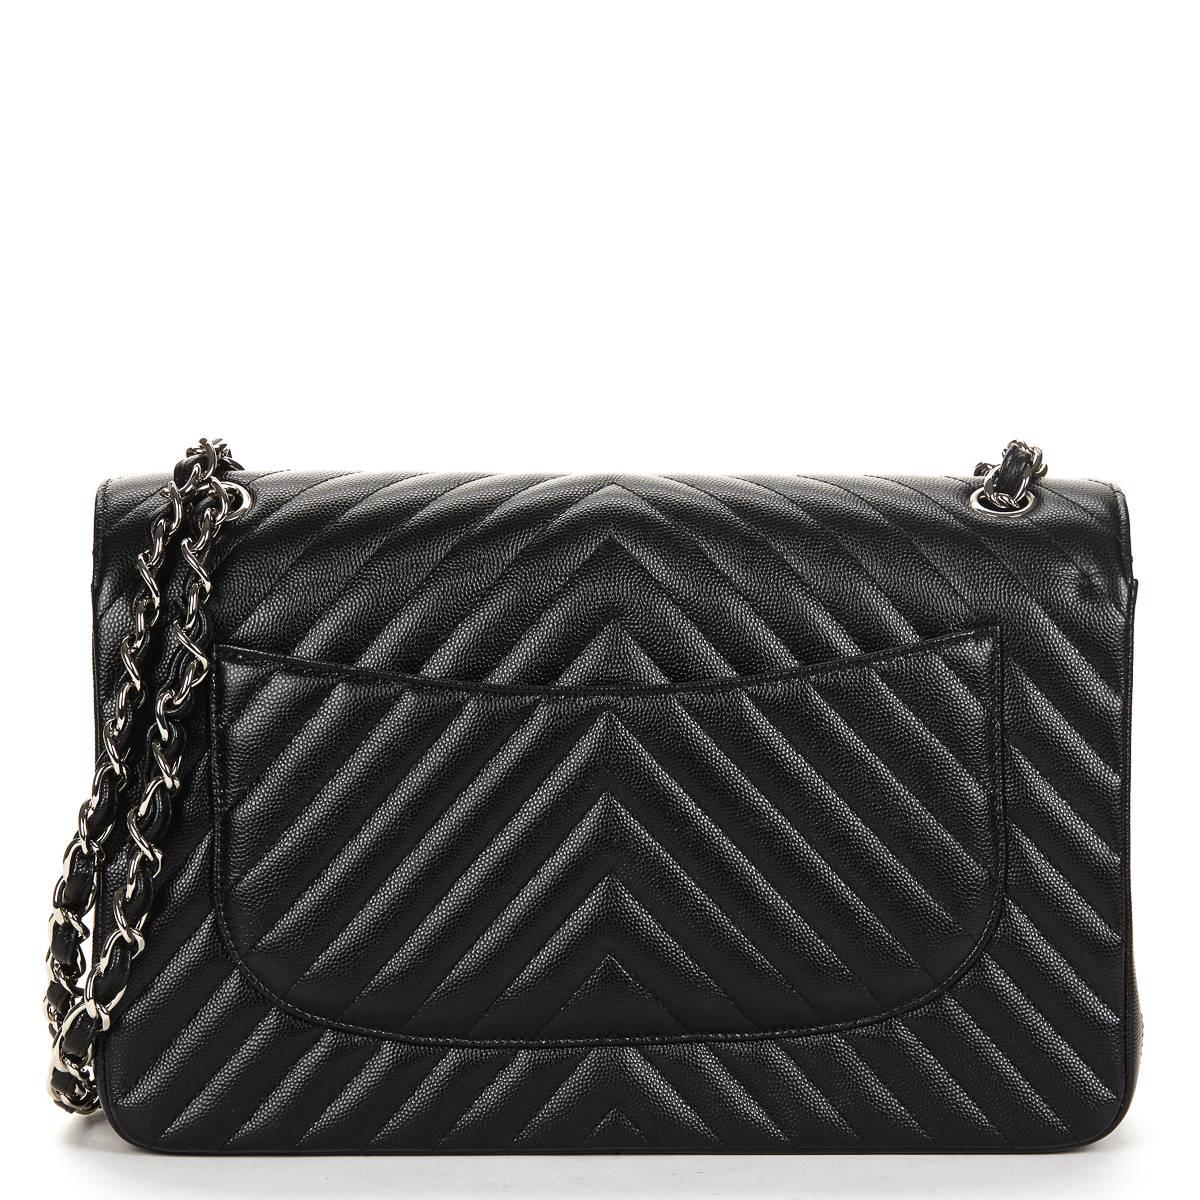 CHANEL
BLACK CHEVRON QUILTED CAVIAR LEATHER JUMBO CLASSIC DOUBLE FLAP BAG 2016

This ladies Chanel Jumbo Classic Double Flap Bag is primarily made from black caviar leather complimented by silver hardware. This bag is in unworn condition